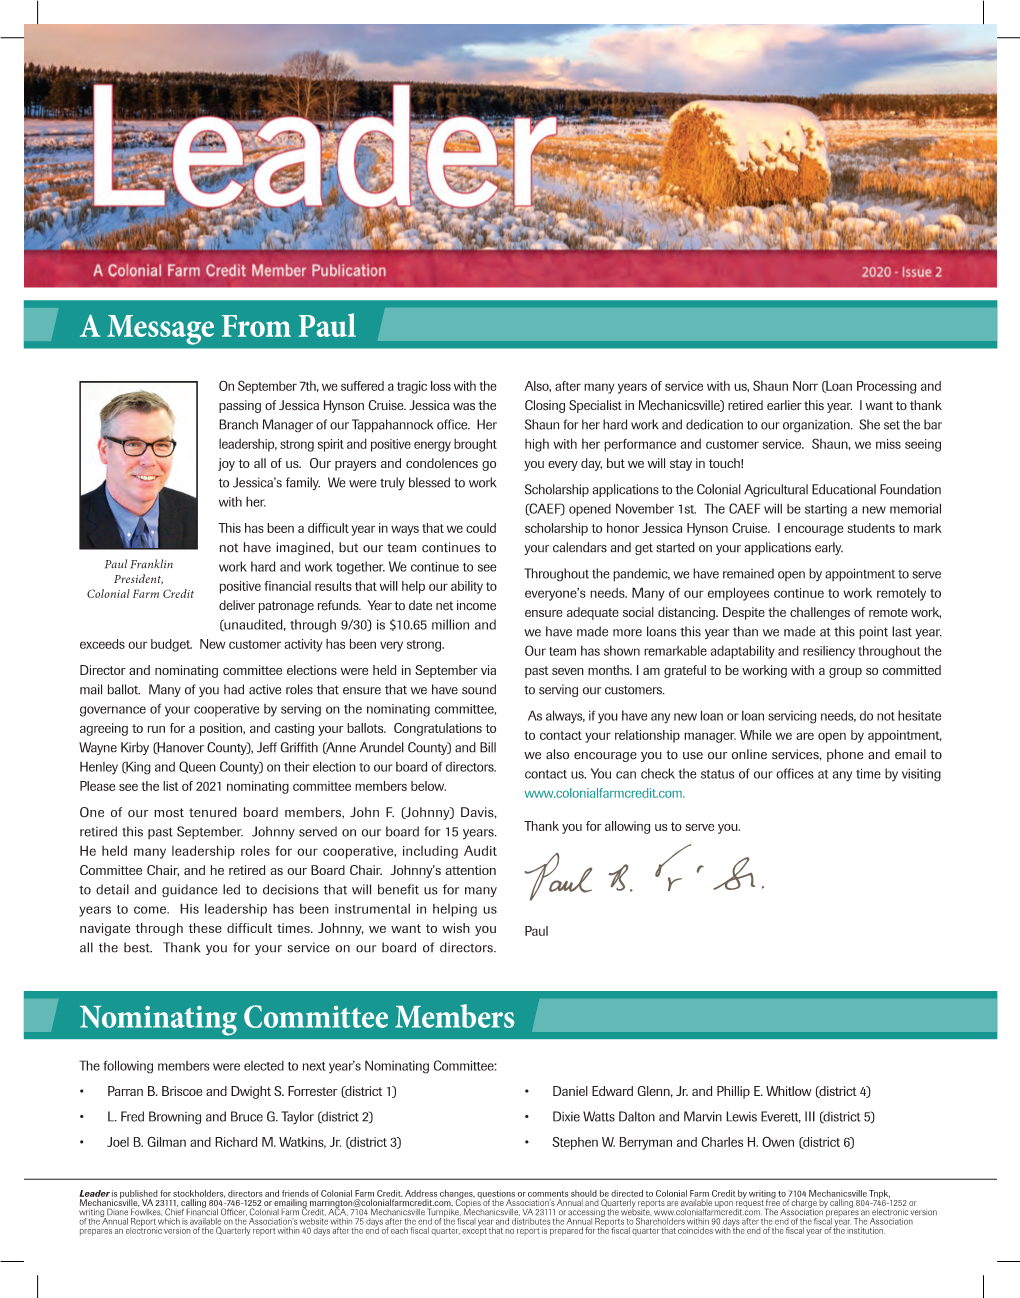 COL 2020 Leader Issue 2